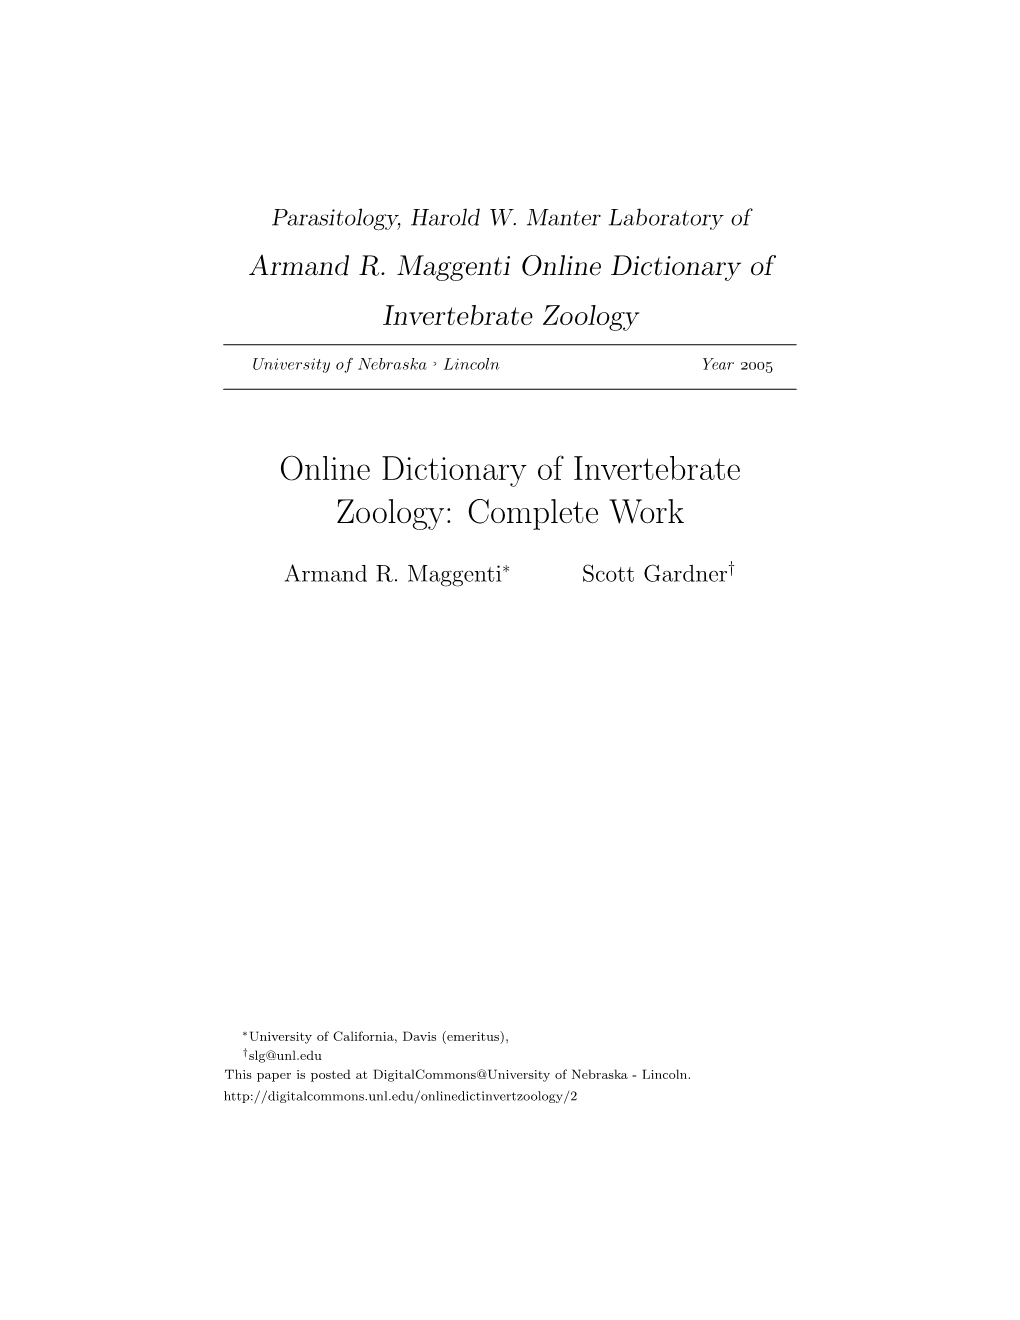 Online Dictionary of Invertebrate Zoology